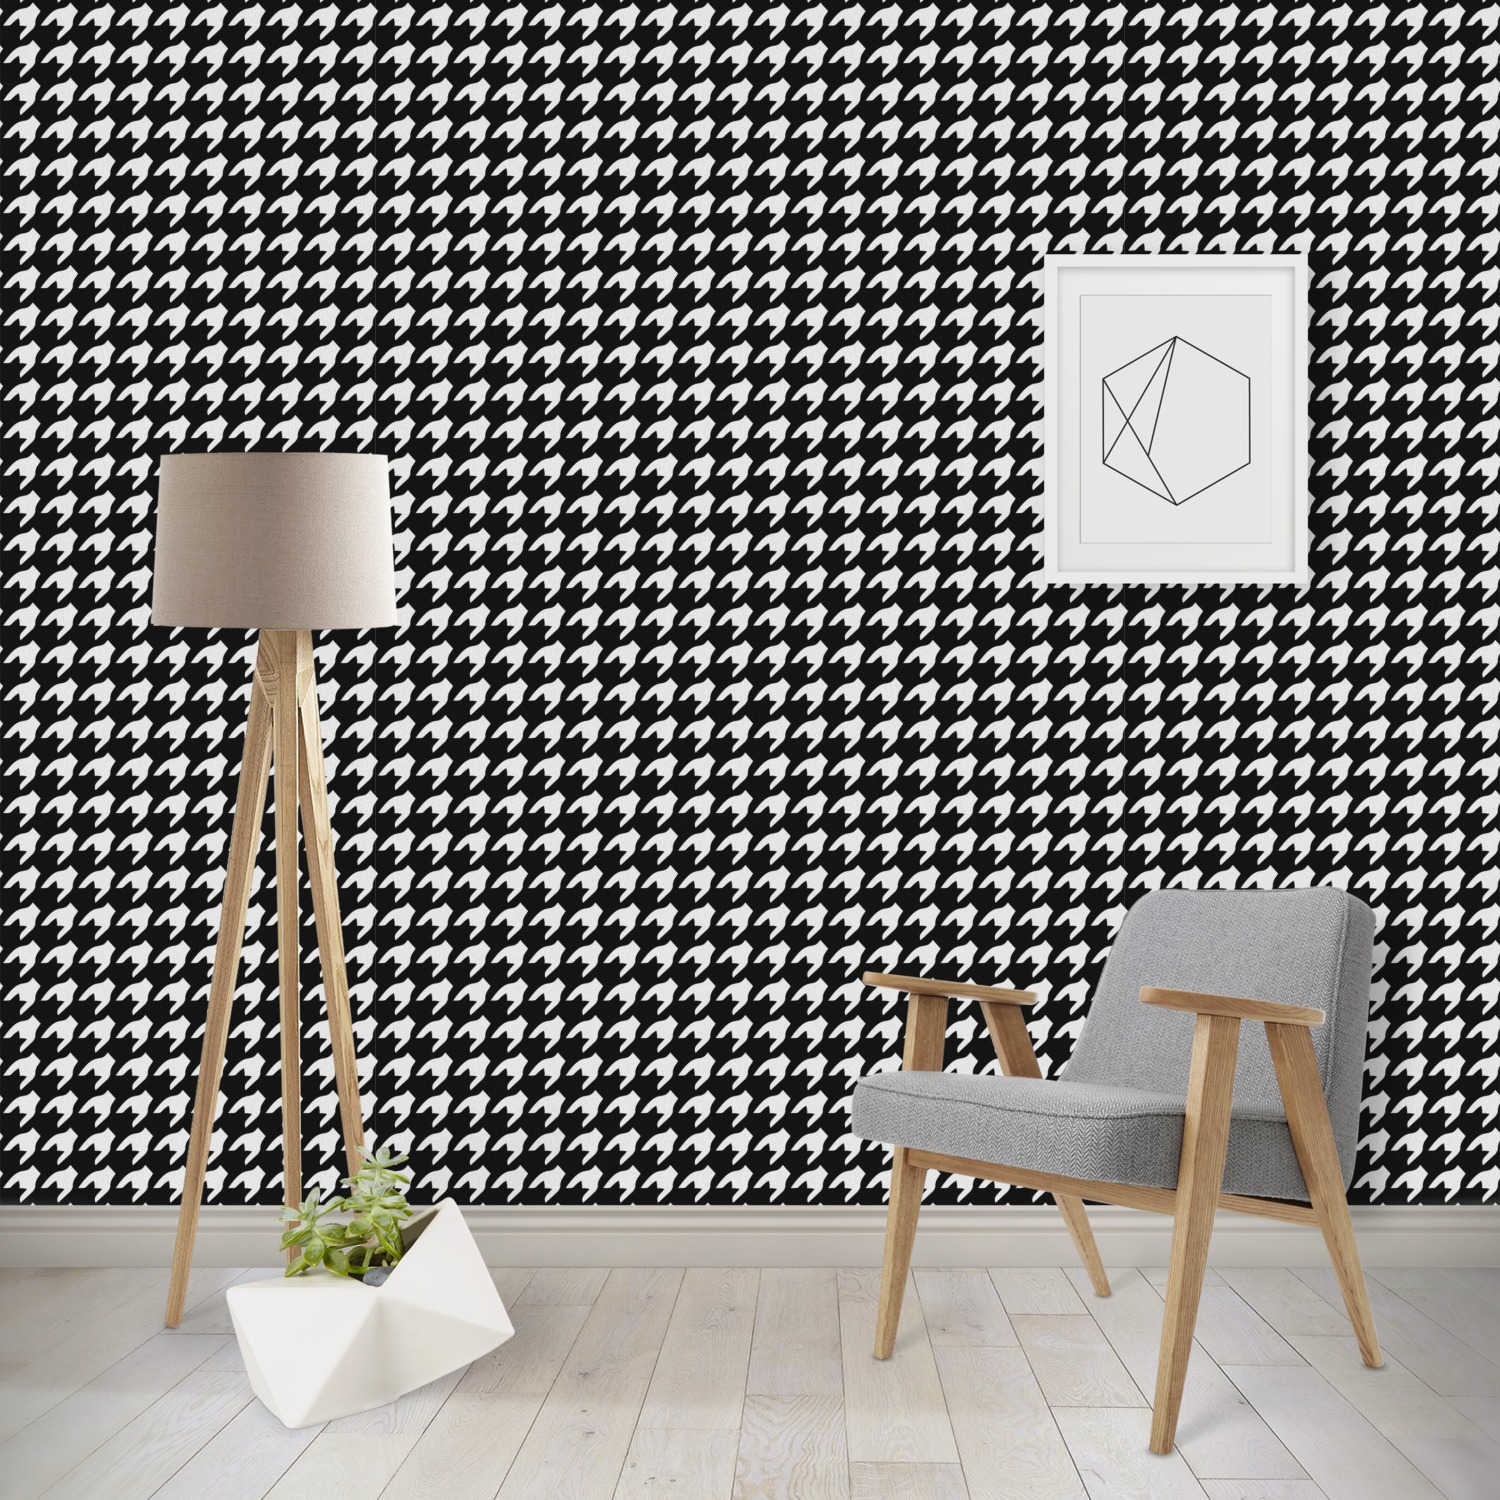 Houndstooth background Black and White Stock Photos  Images  Alamy